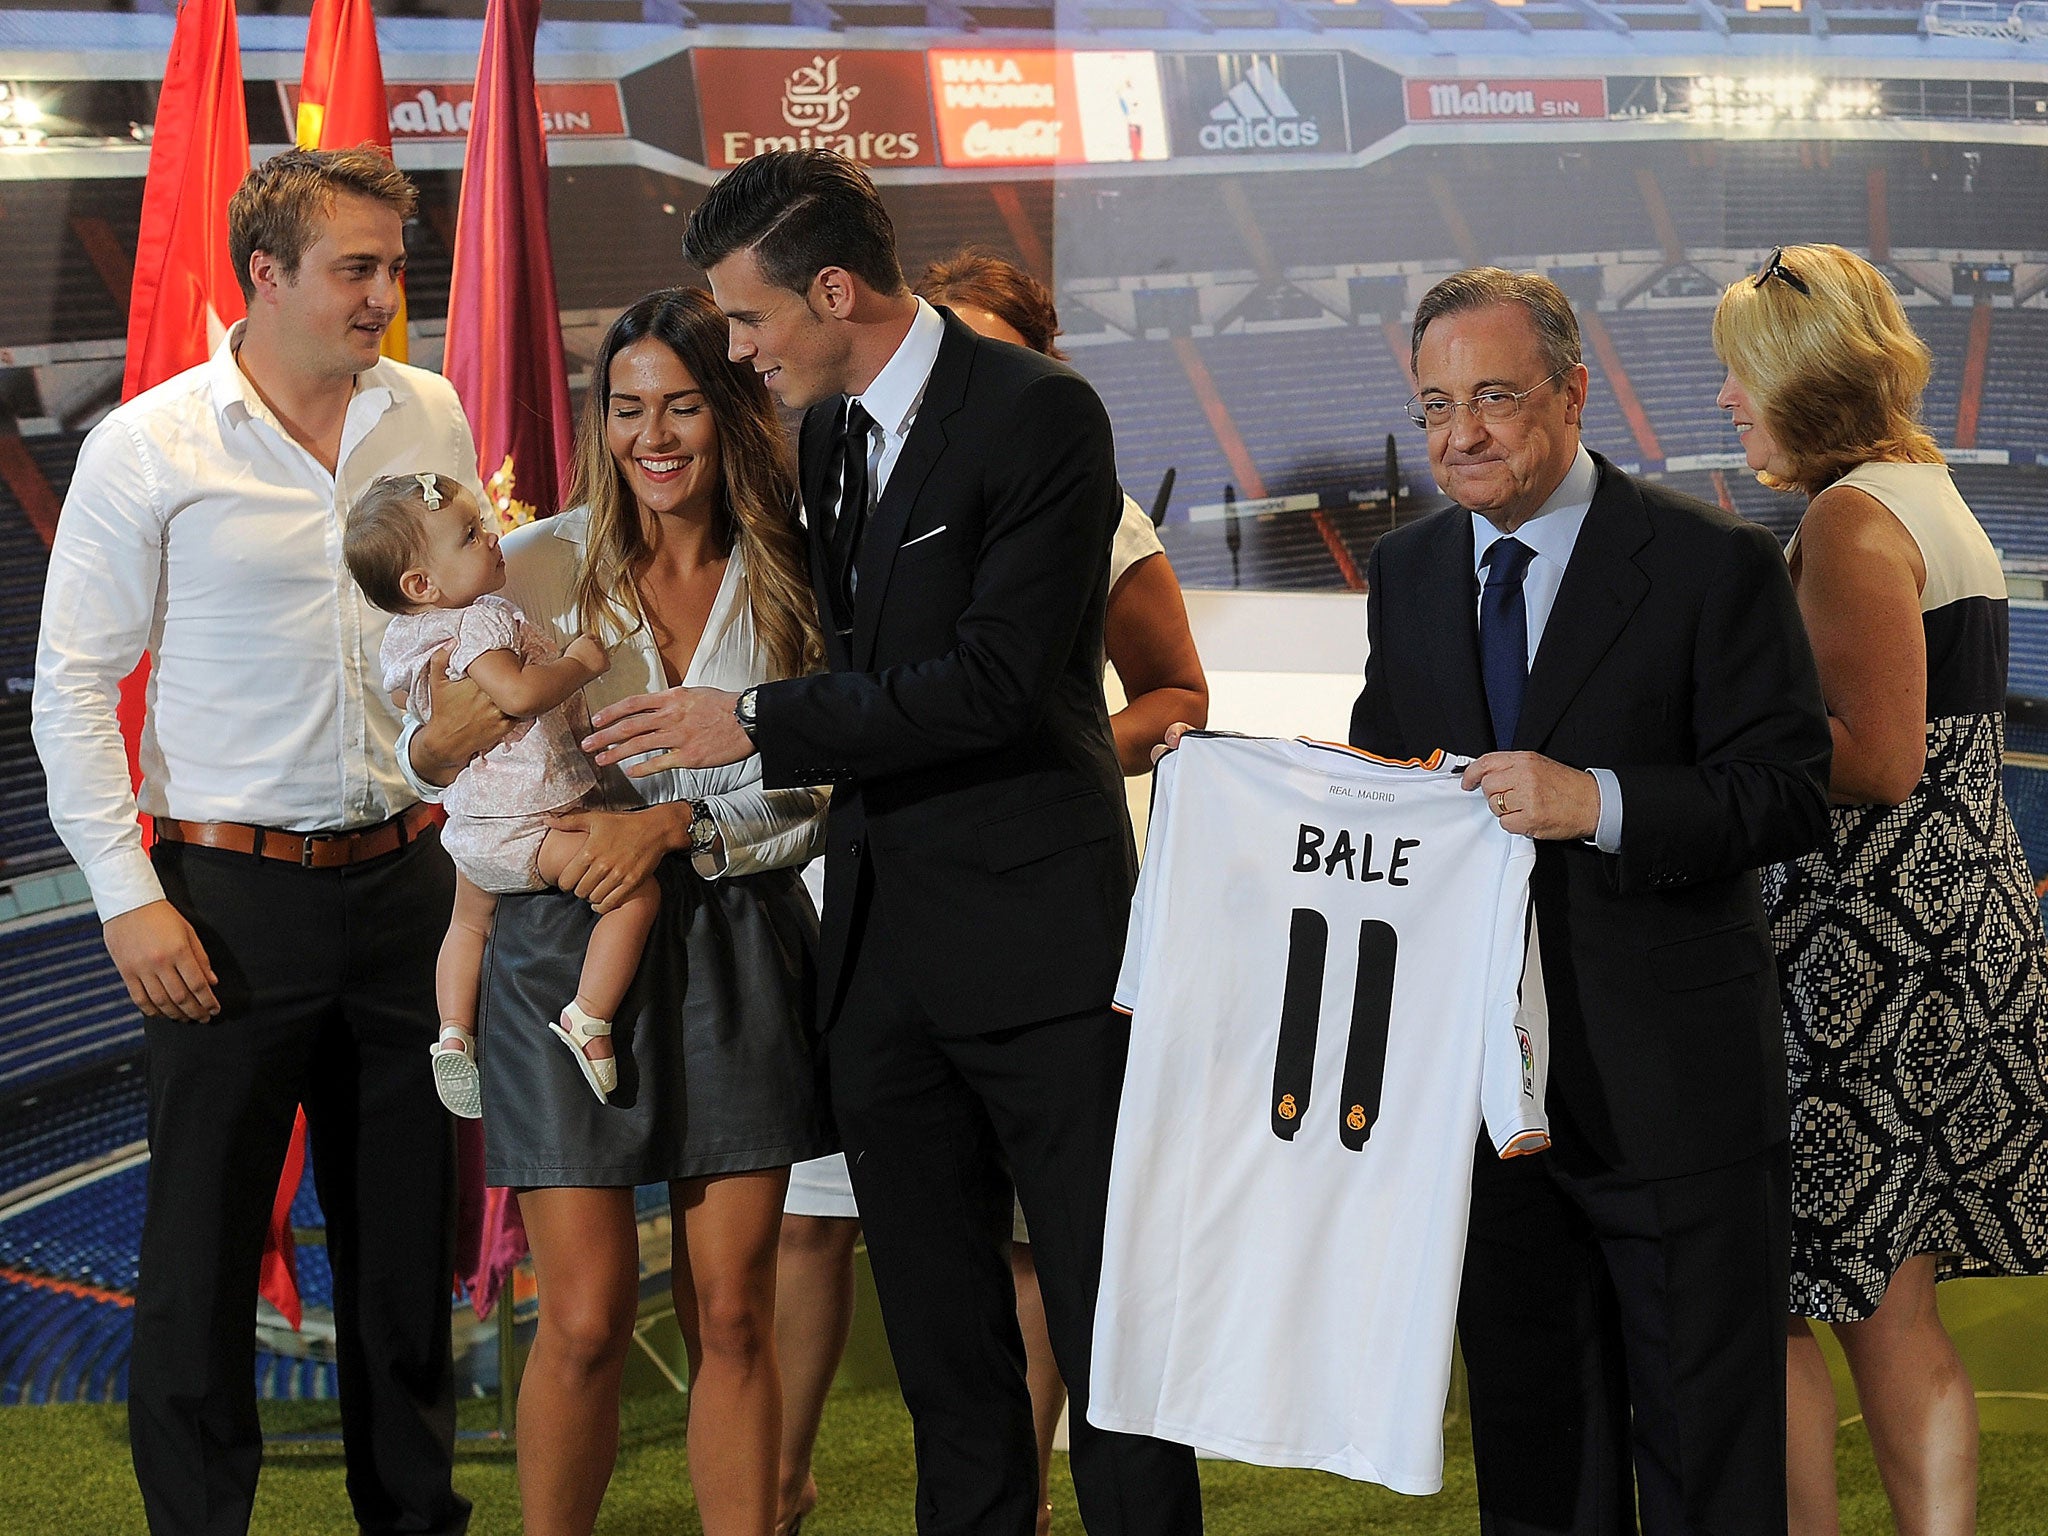 Gareth Bale, centre, was unveiled at the Santiago Bernabeu in Madrid by Real president Florentino Pérez, right